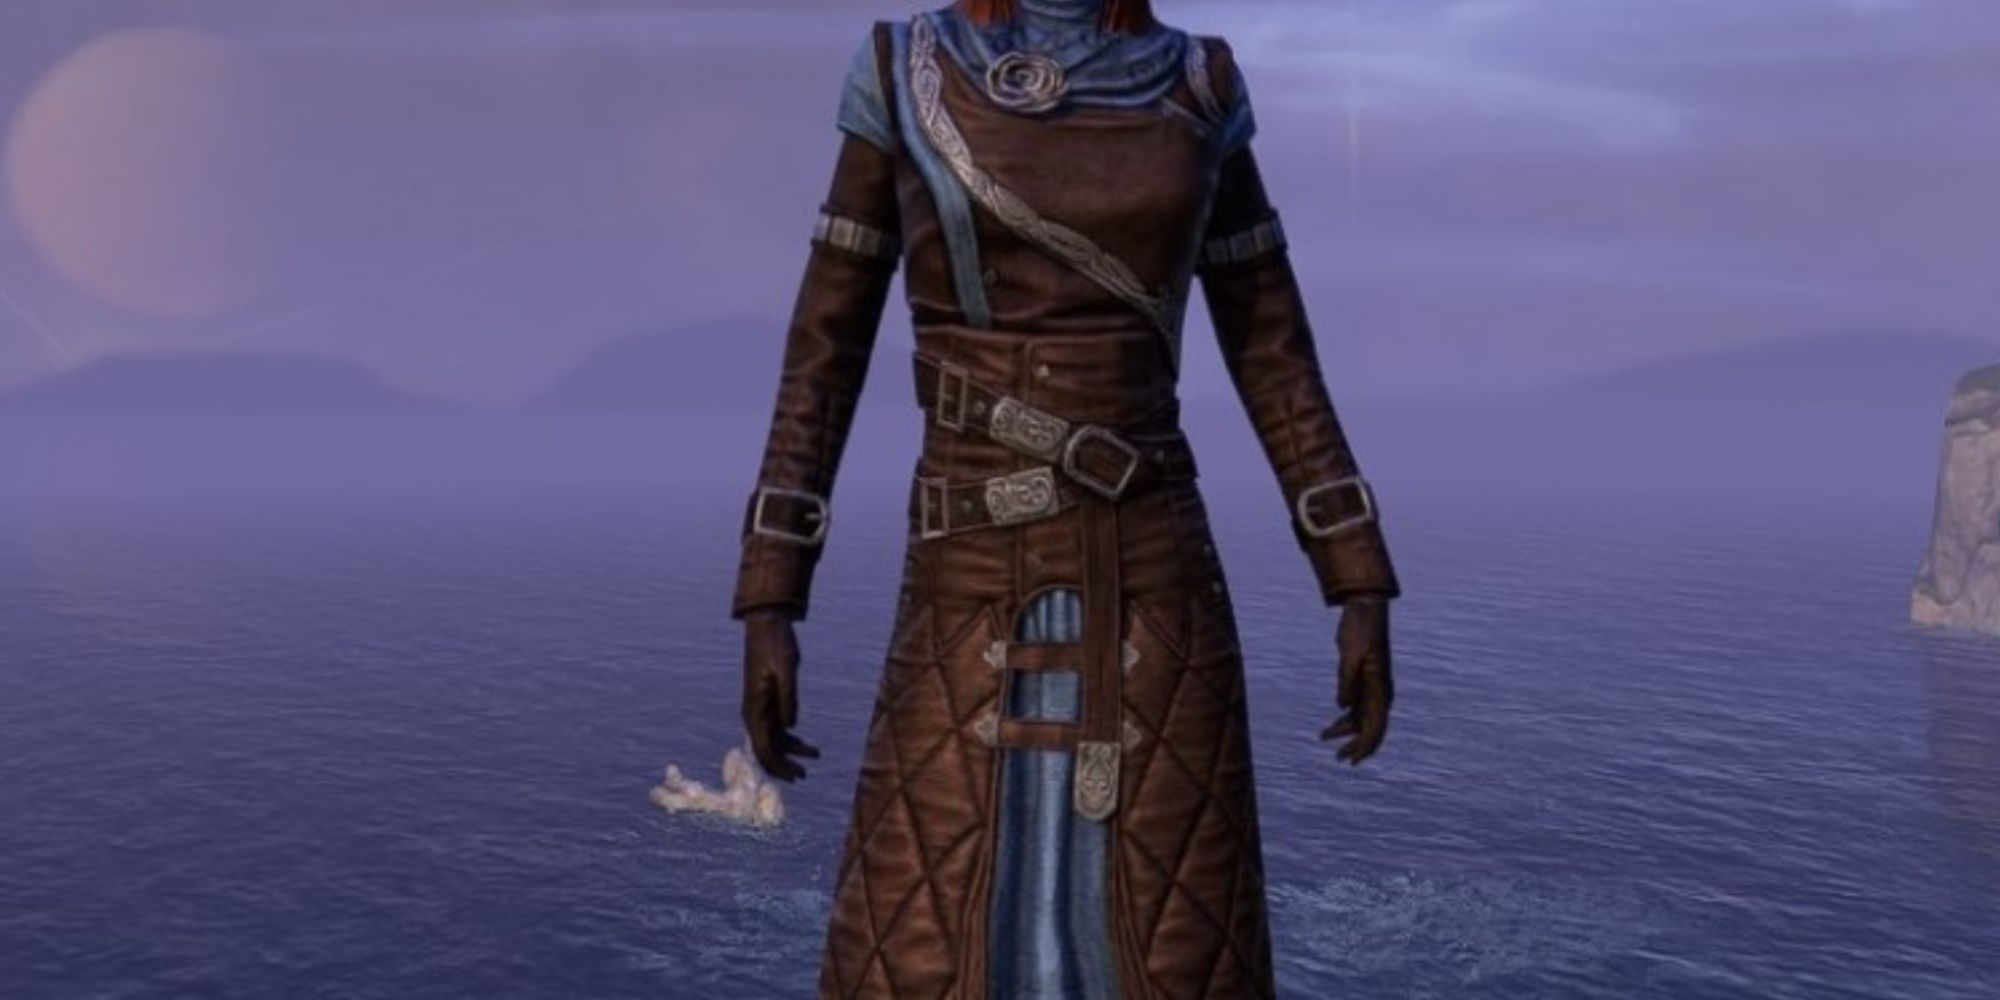 ESO Character Wearing The Courtly Traveling Attire